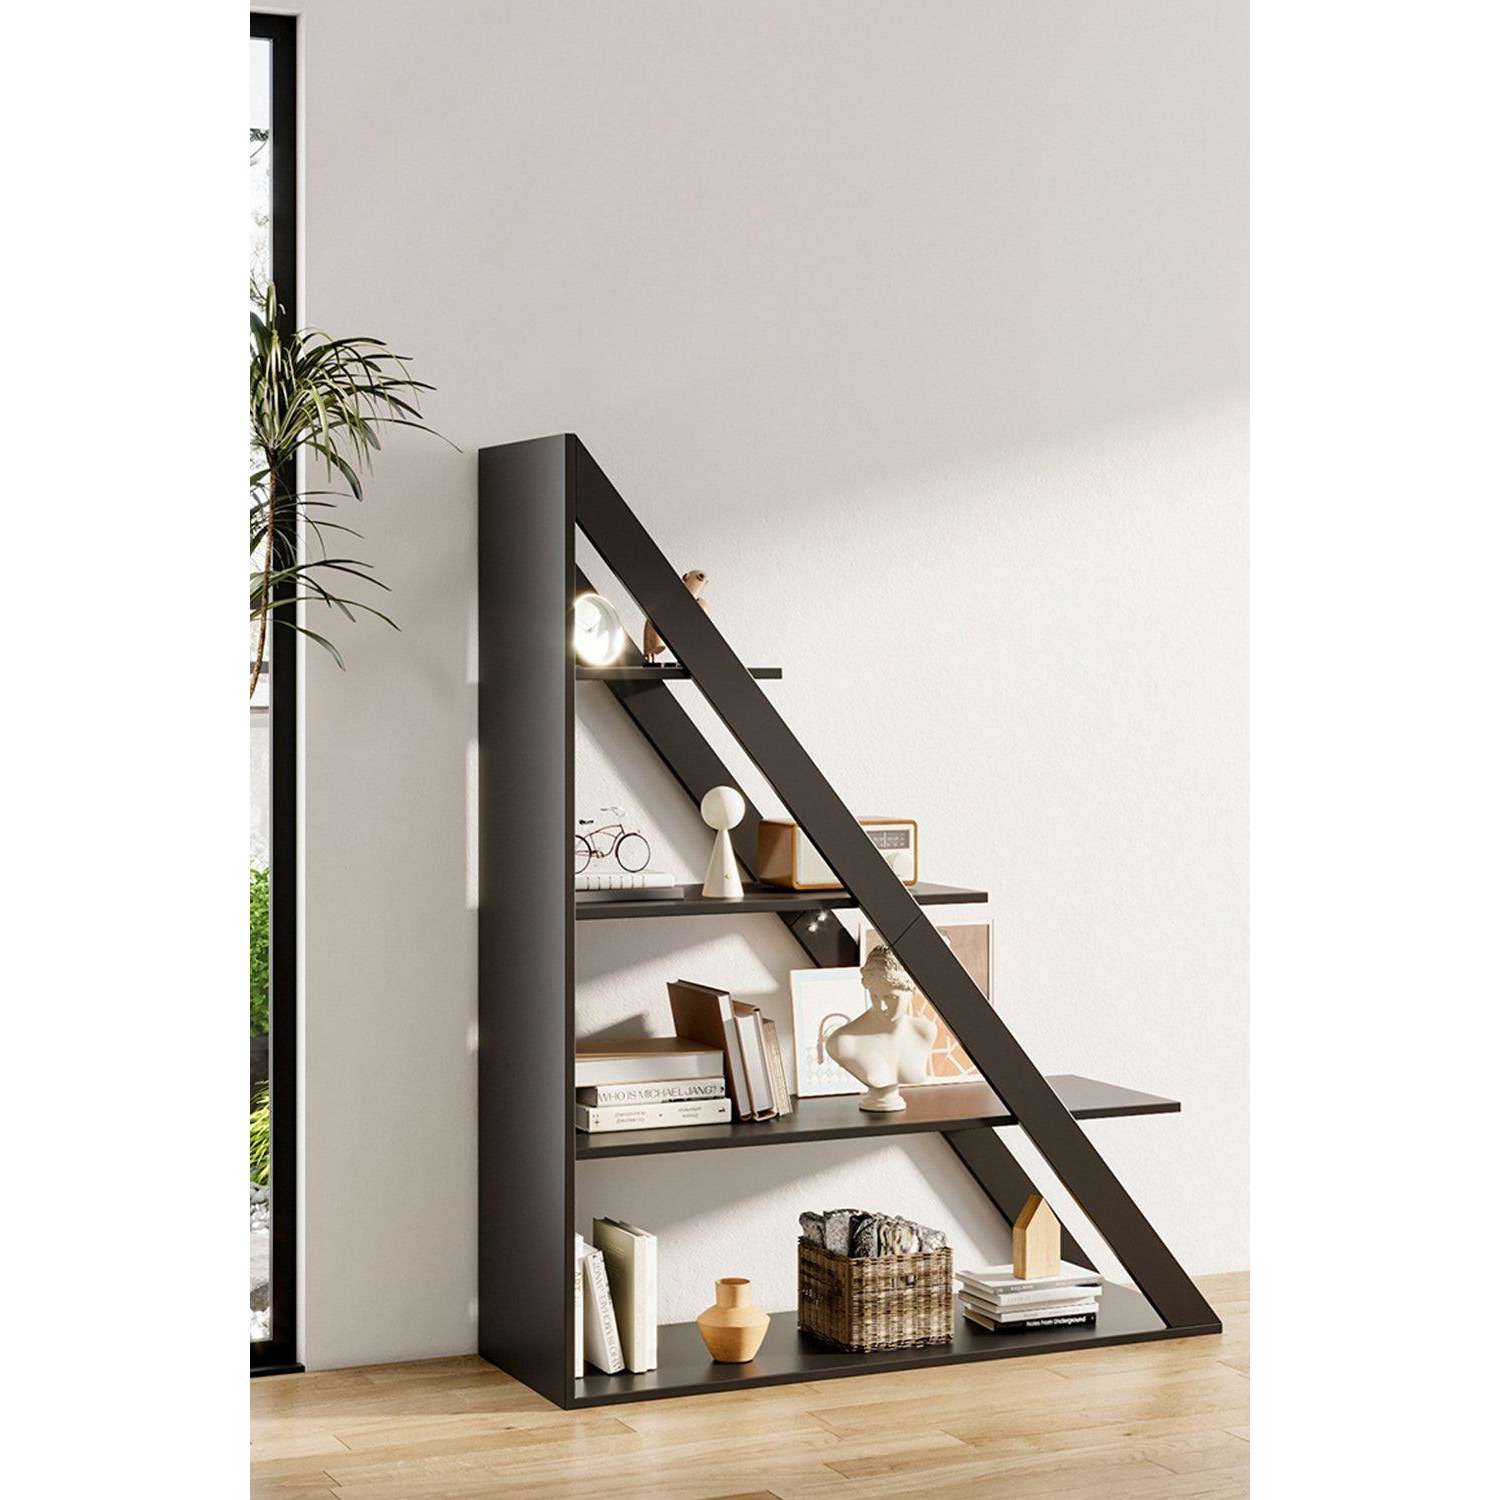 4-Tiers Triangle Ladder Bookcase Shelving - image 1